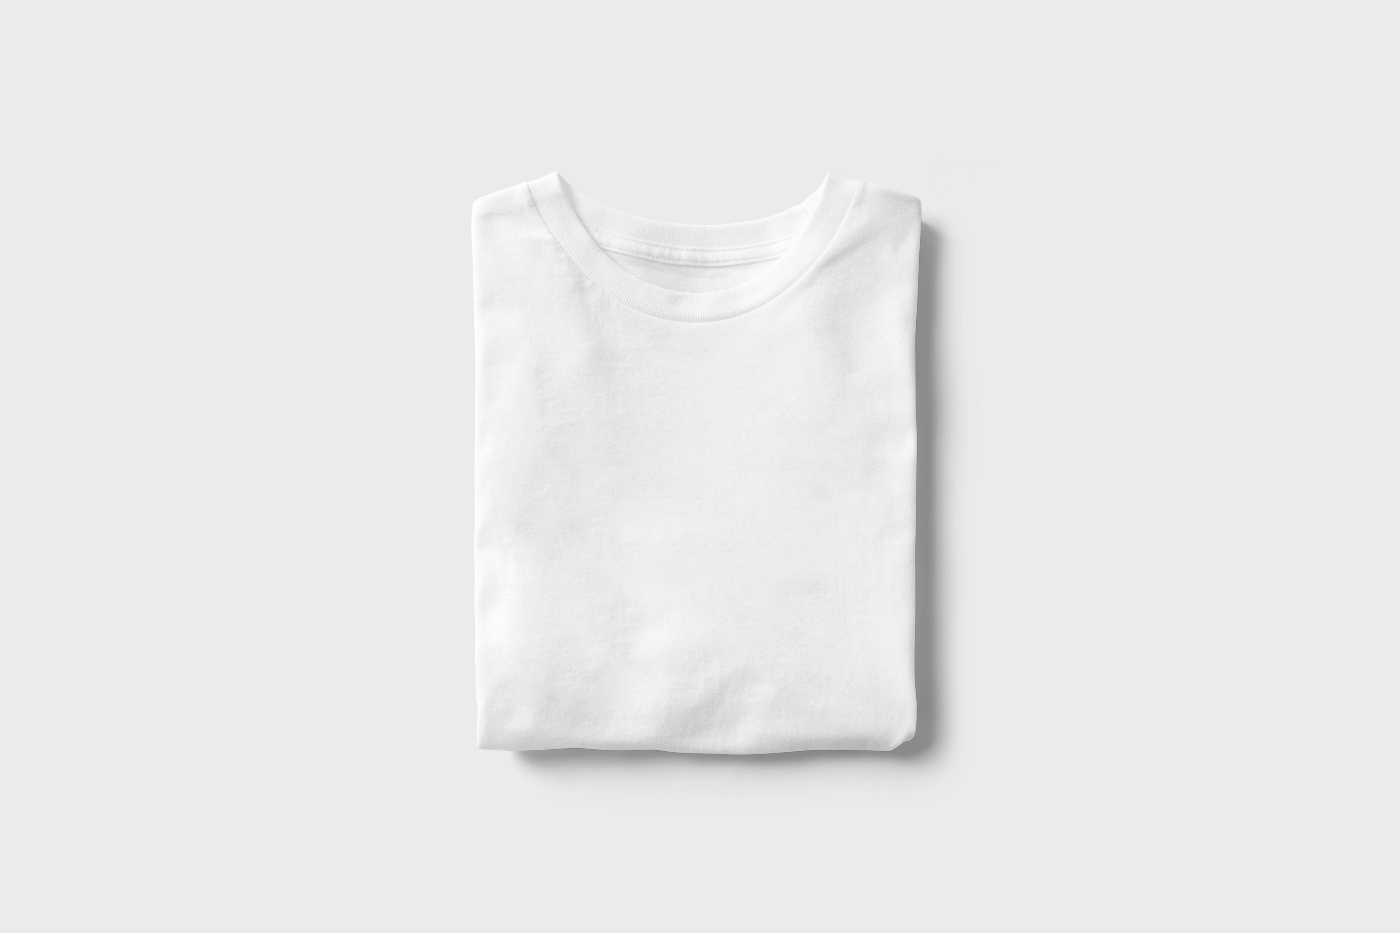 Top View of Two Folded T-Shirts Mockup FREE PSD